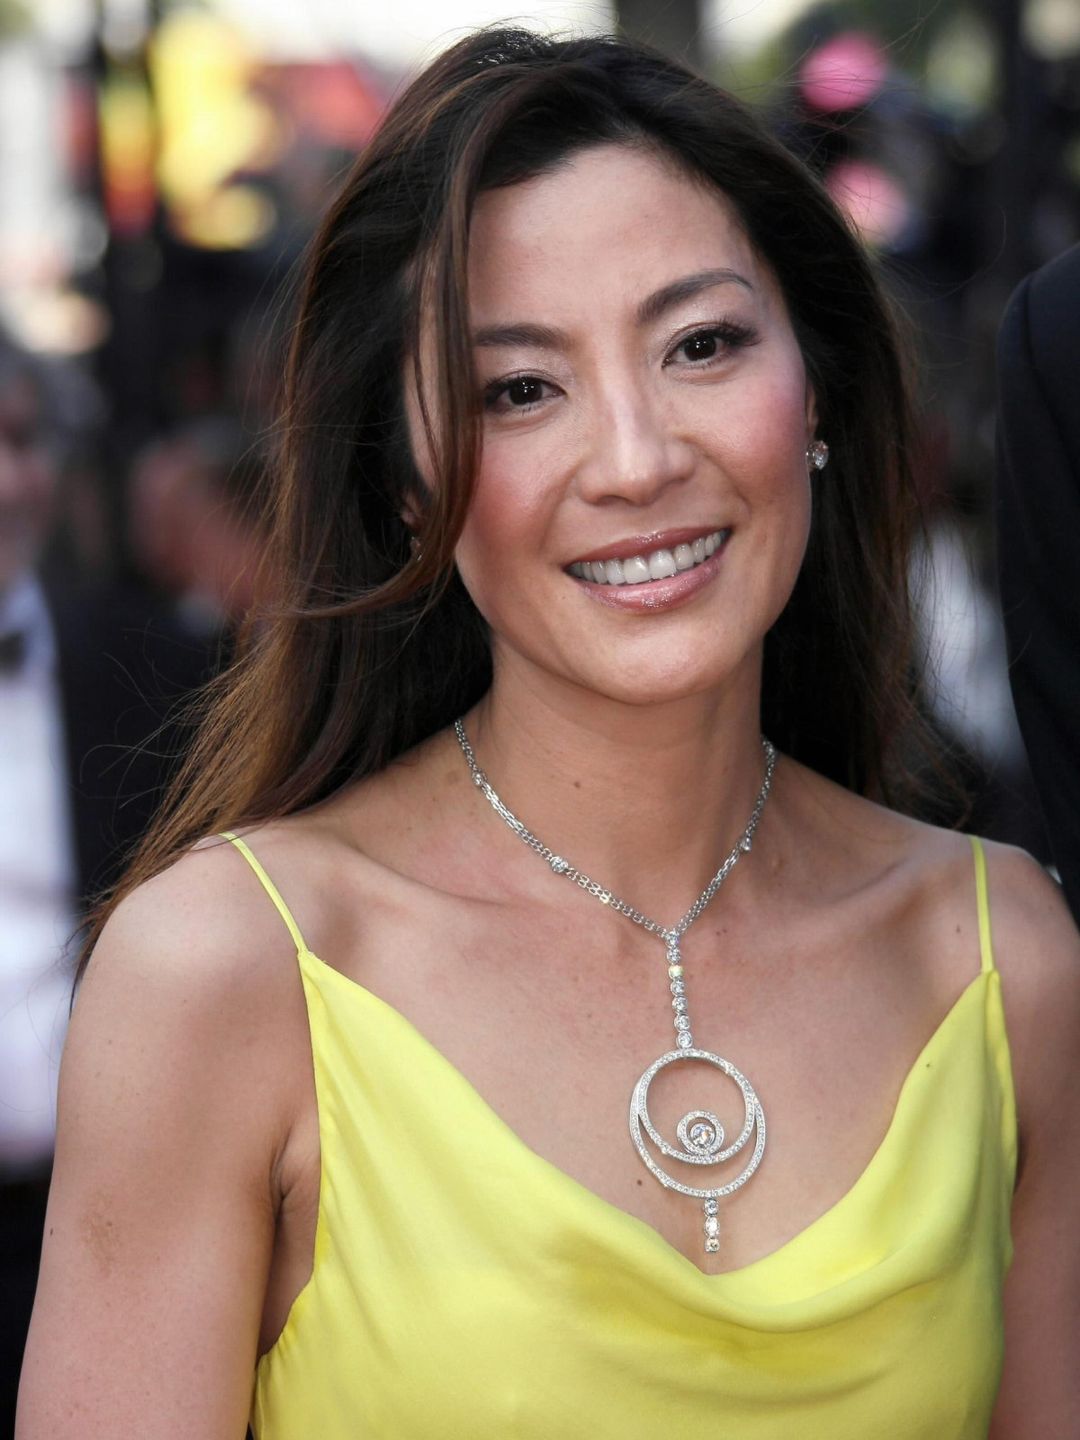 Michelle Yeoh does she have a husband